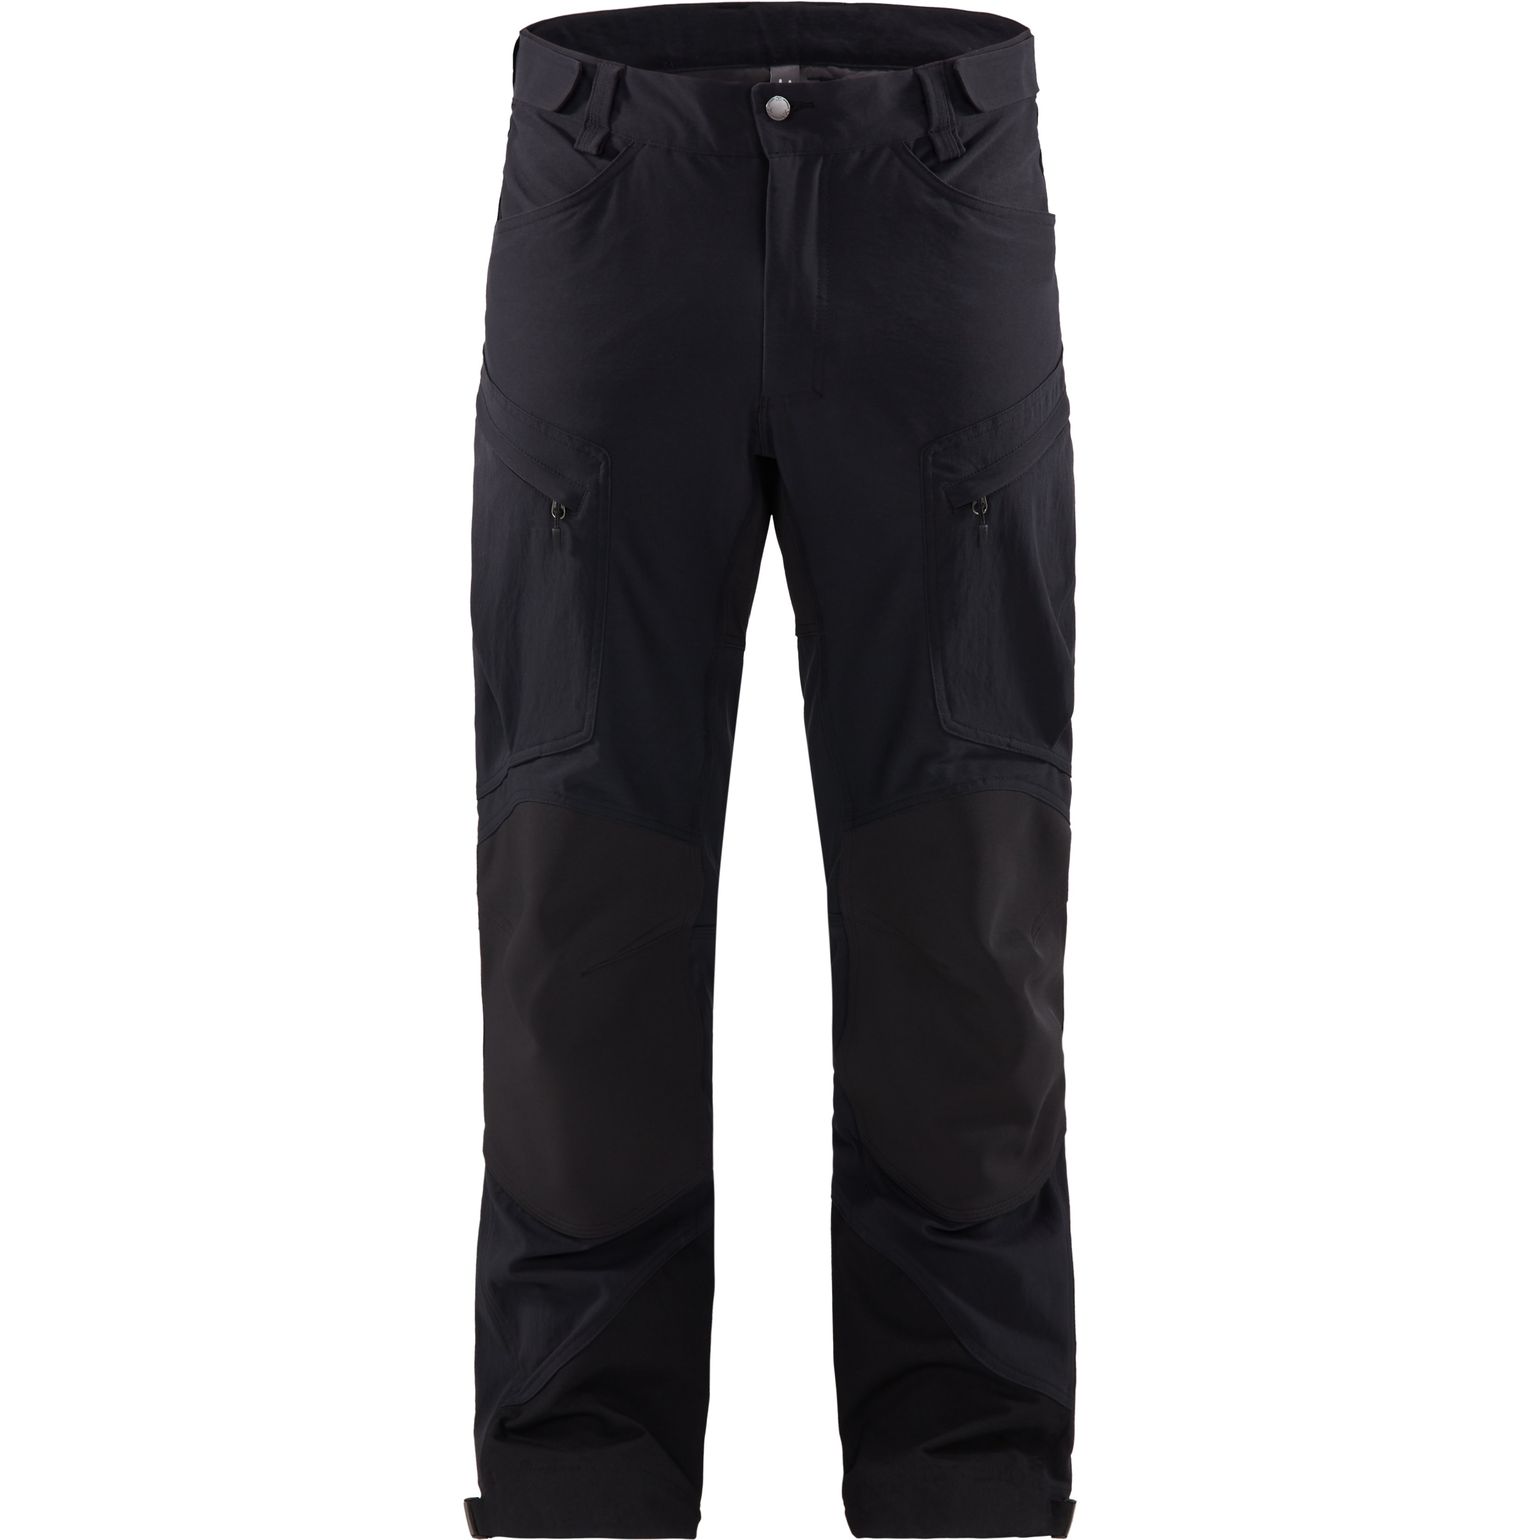 Men's Rugged Mountain Pant True Black Solid Sho